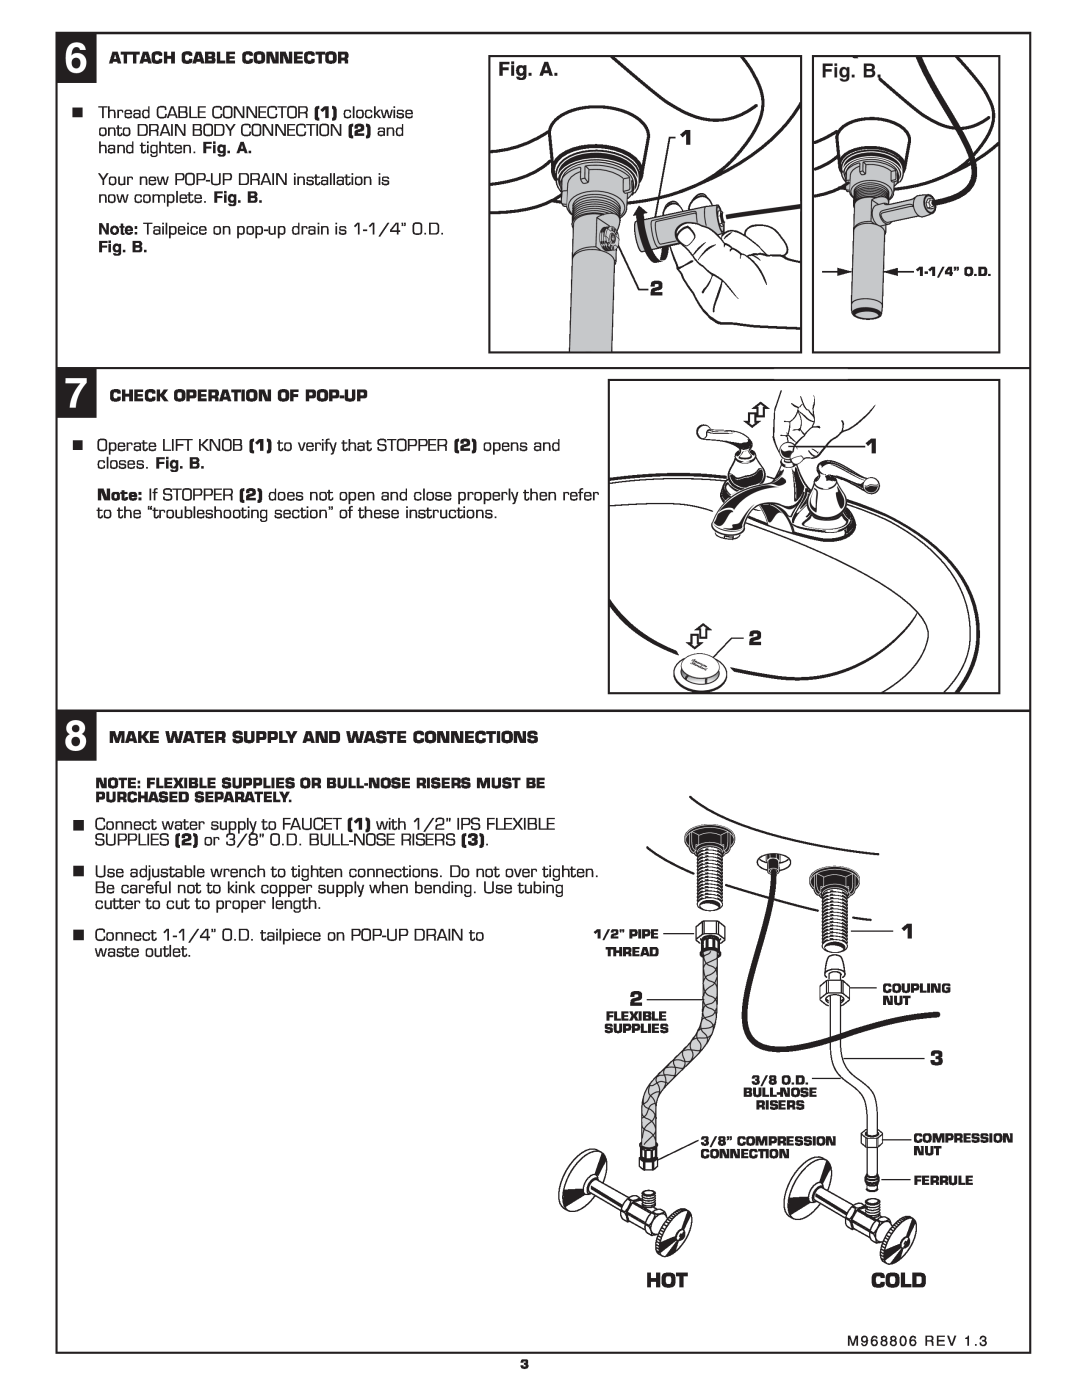 American Standard 4504S Fig. A, Fig. B, Hotcold, Attach Cable Connector, Check Operation Of Pop-Up 